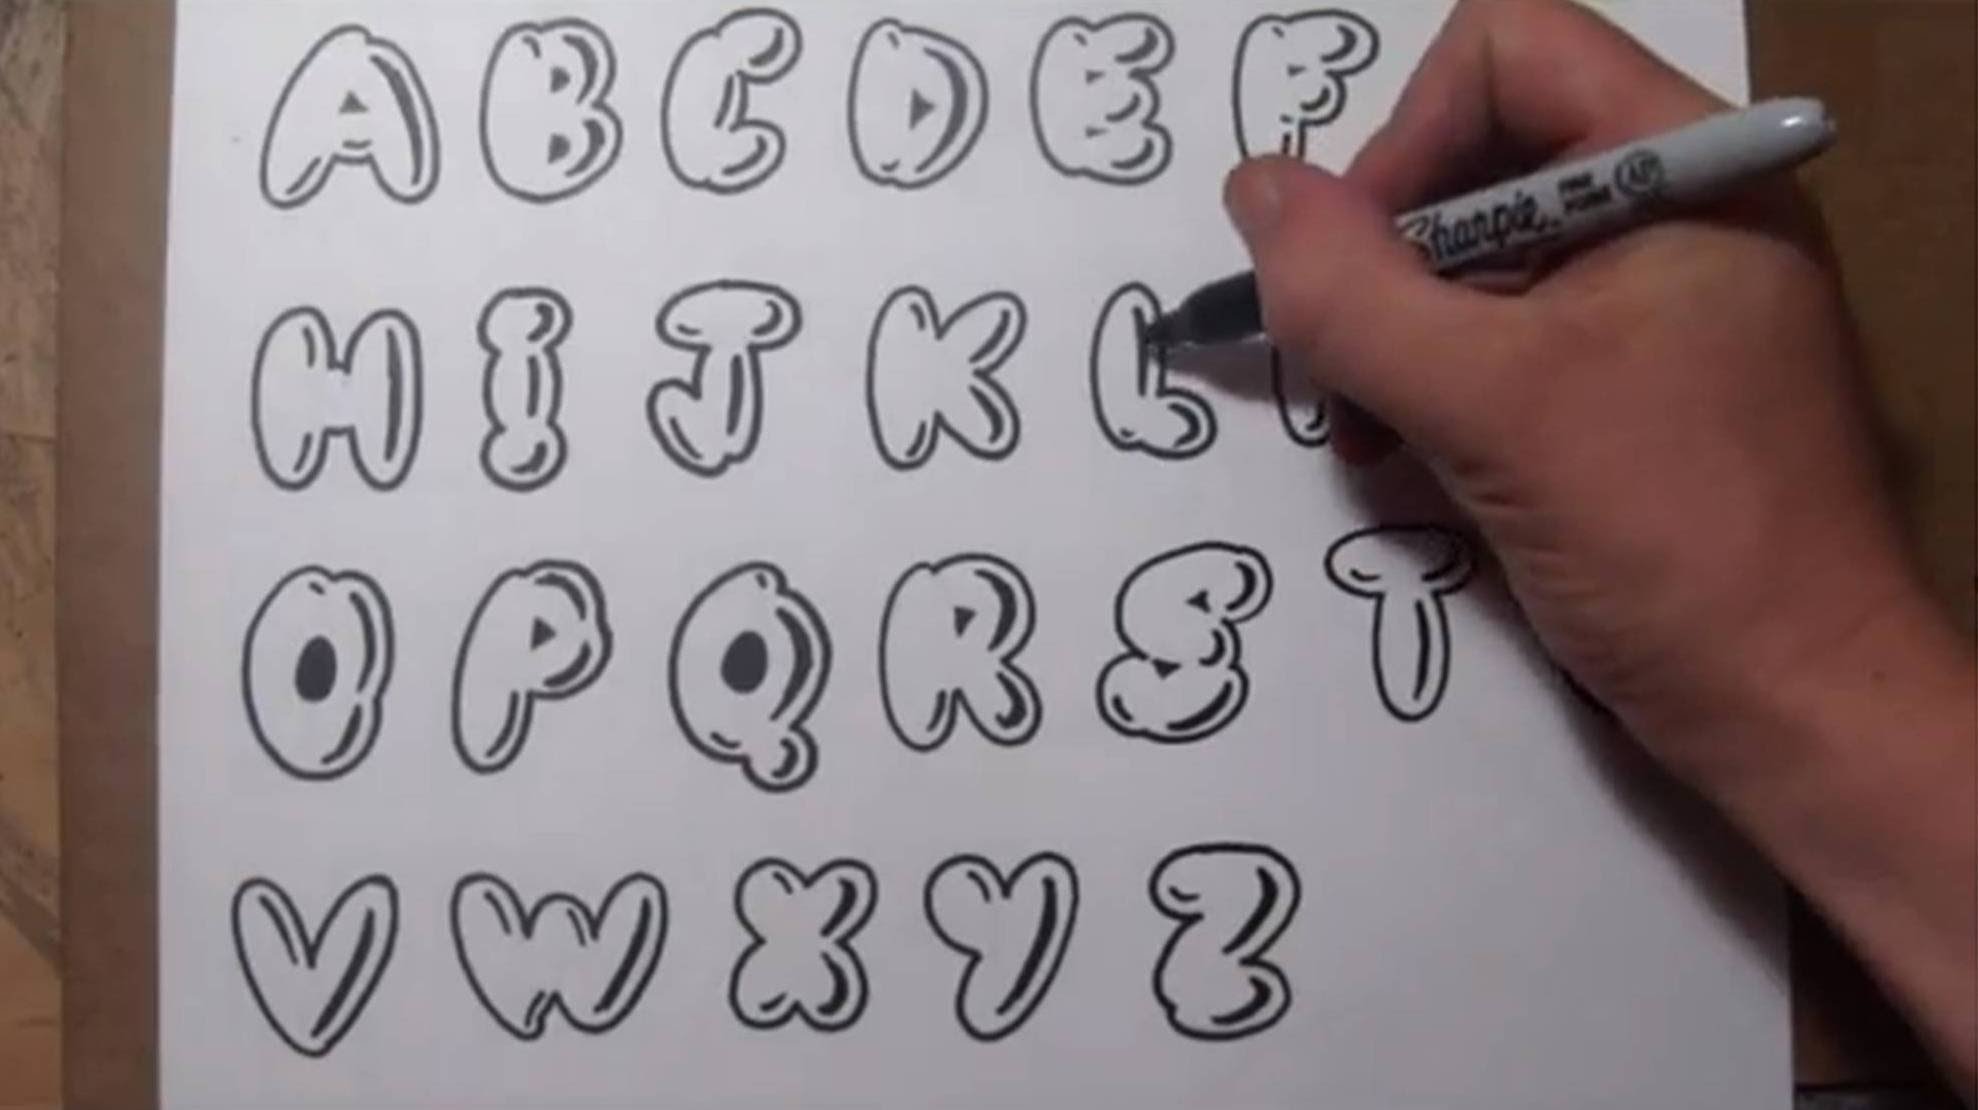 Fonts For Drawing at GetDrawings Free download